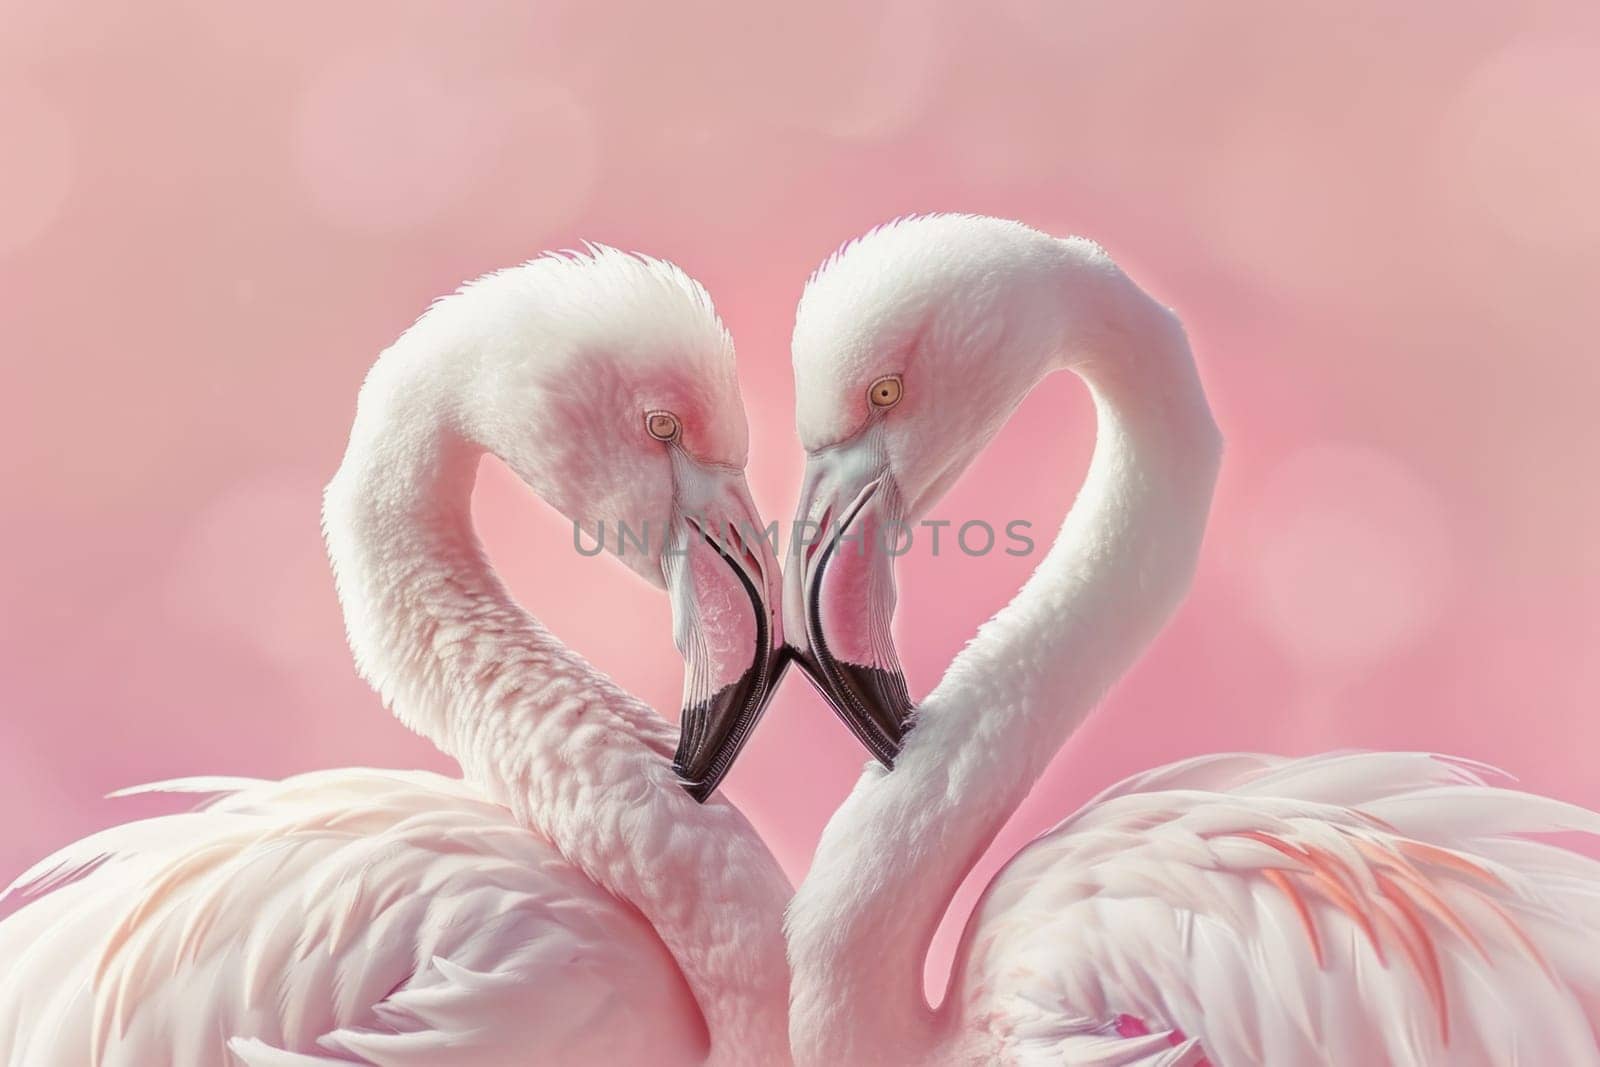 Romantic flamingos forming heart shape on pink background love, relationship, wildlife, nature, beauty concept by Vichizh